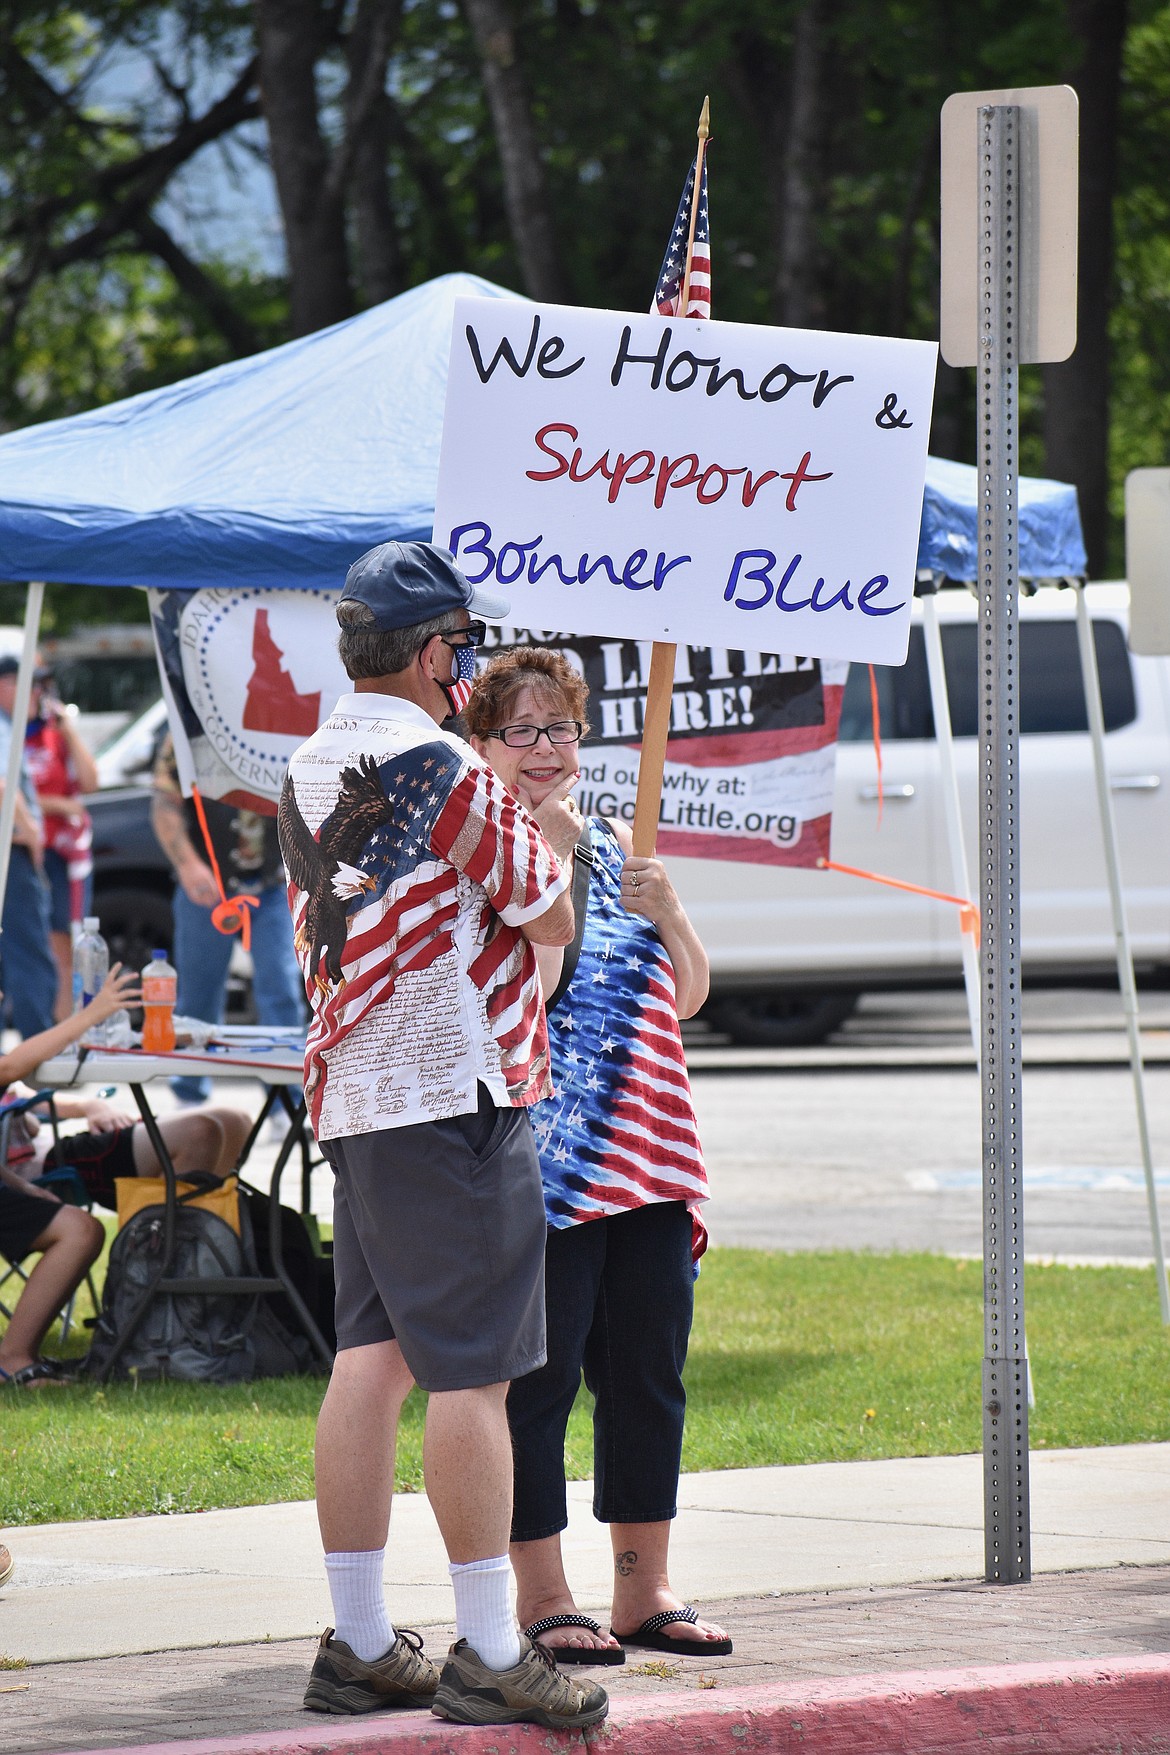 Kandy Brumley (right) holds up a sign showing support for local law enforcement during Saturday’s Back the Bonner Blue event.